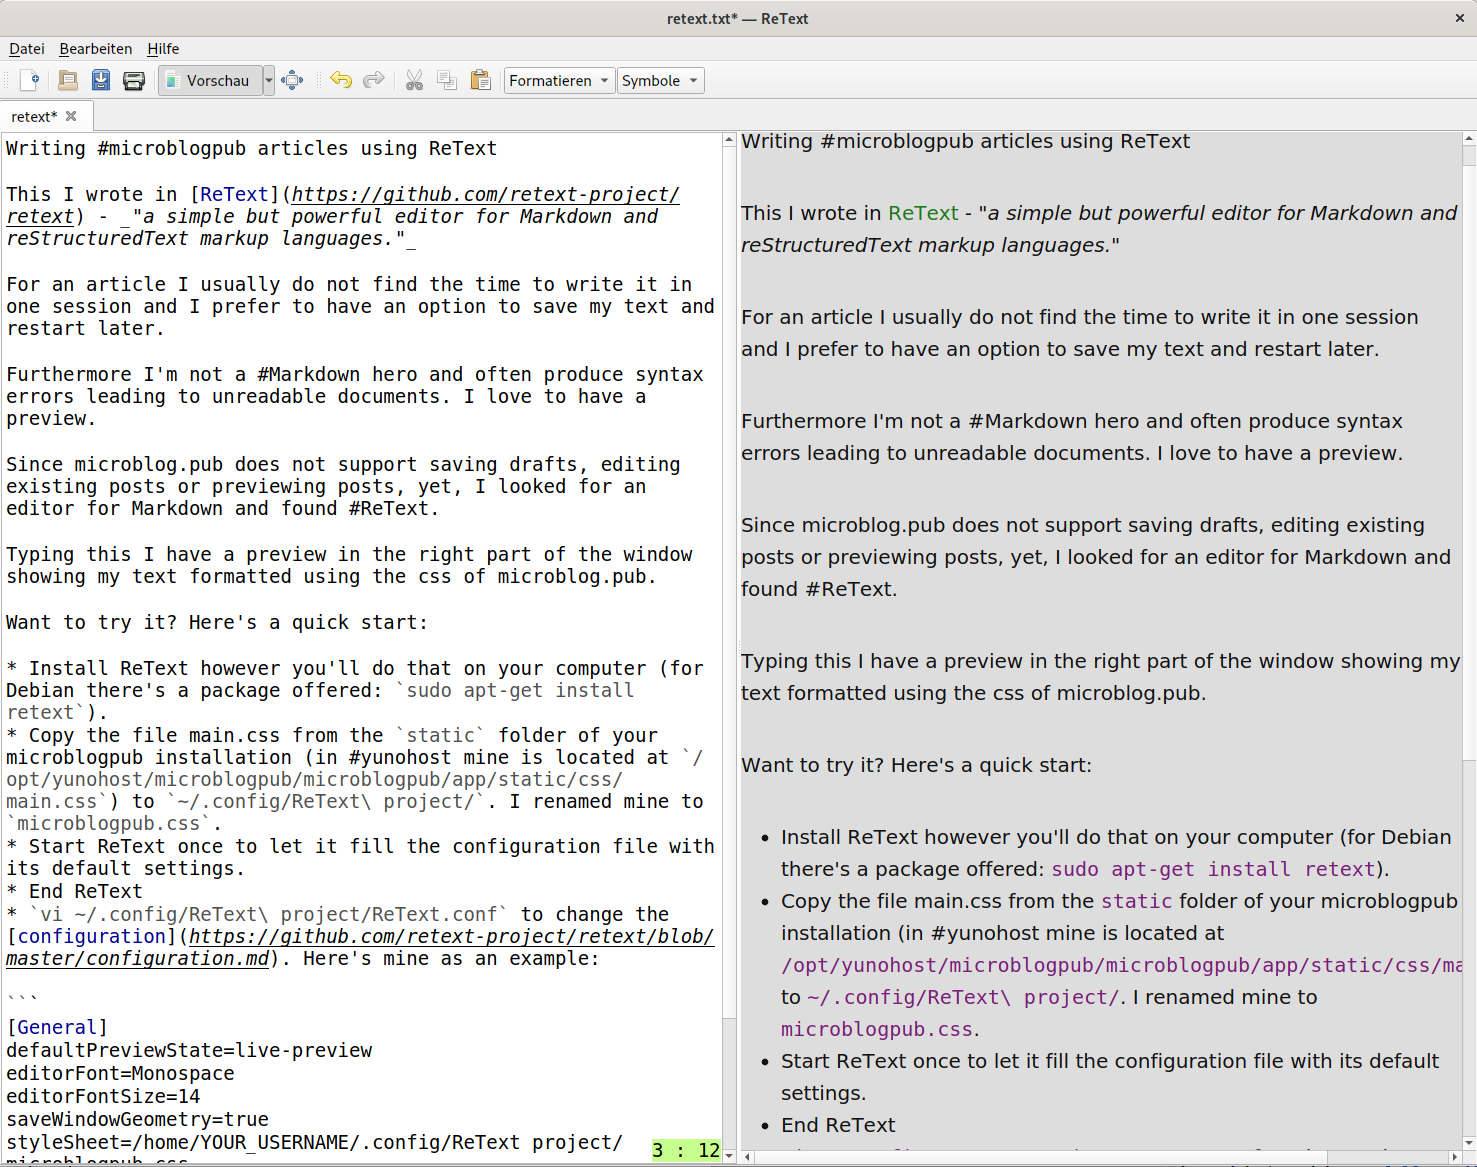 Screenshot showing my retext window (in german) with the live preview of my microblogpub css in the right window half.